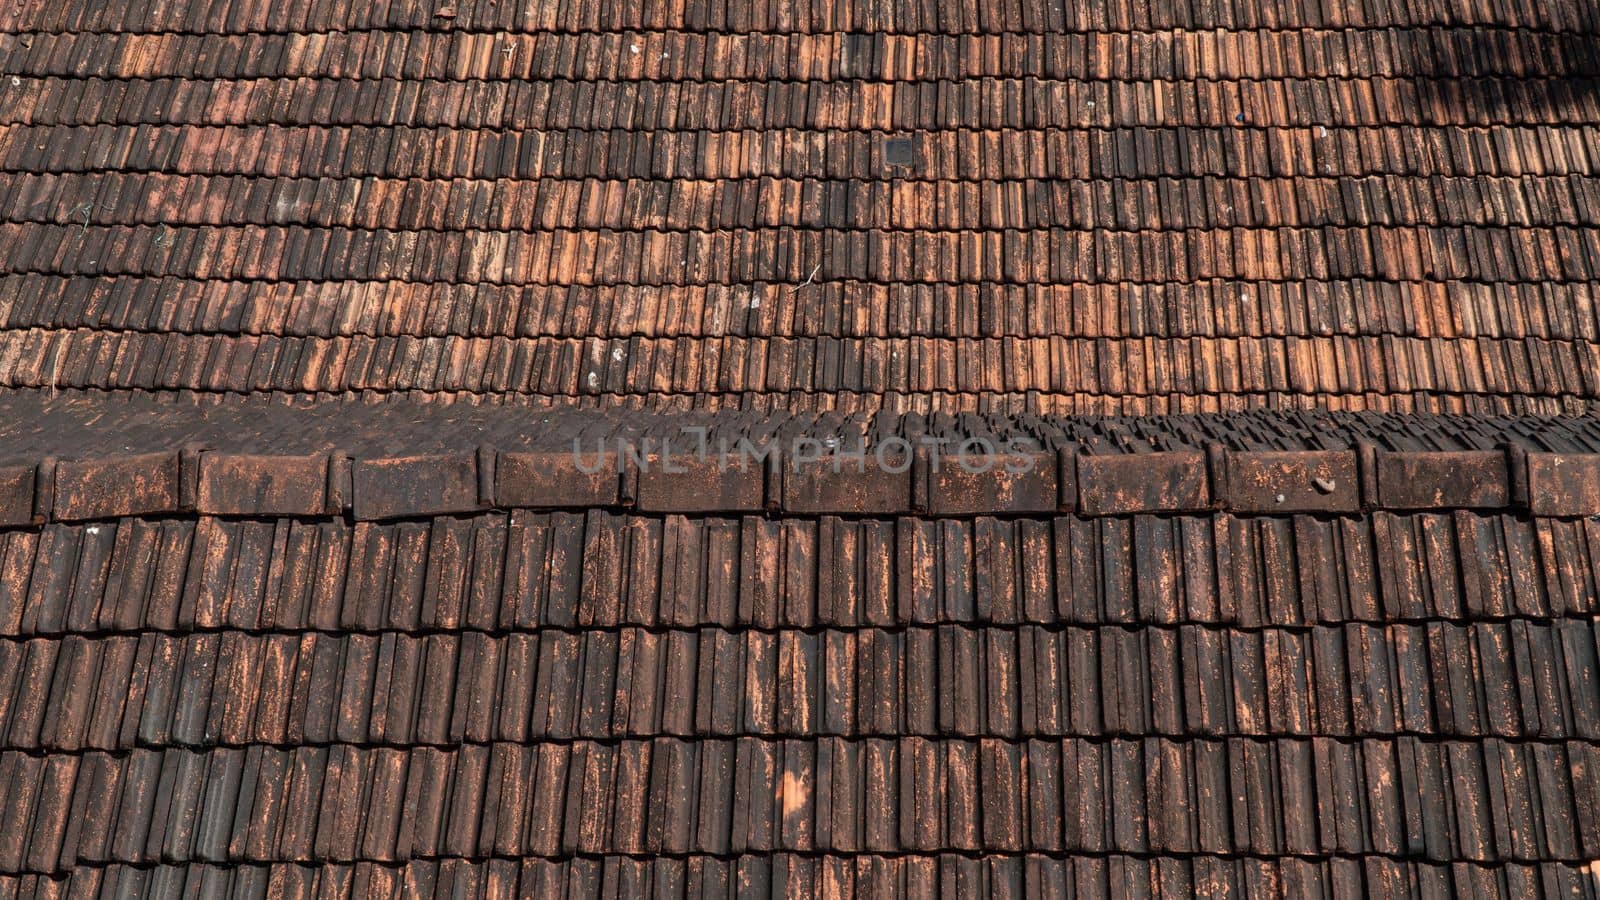 Tiled roof close-up texture, brick. High quality photo